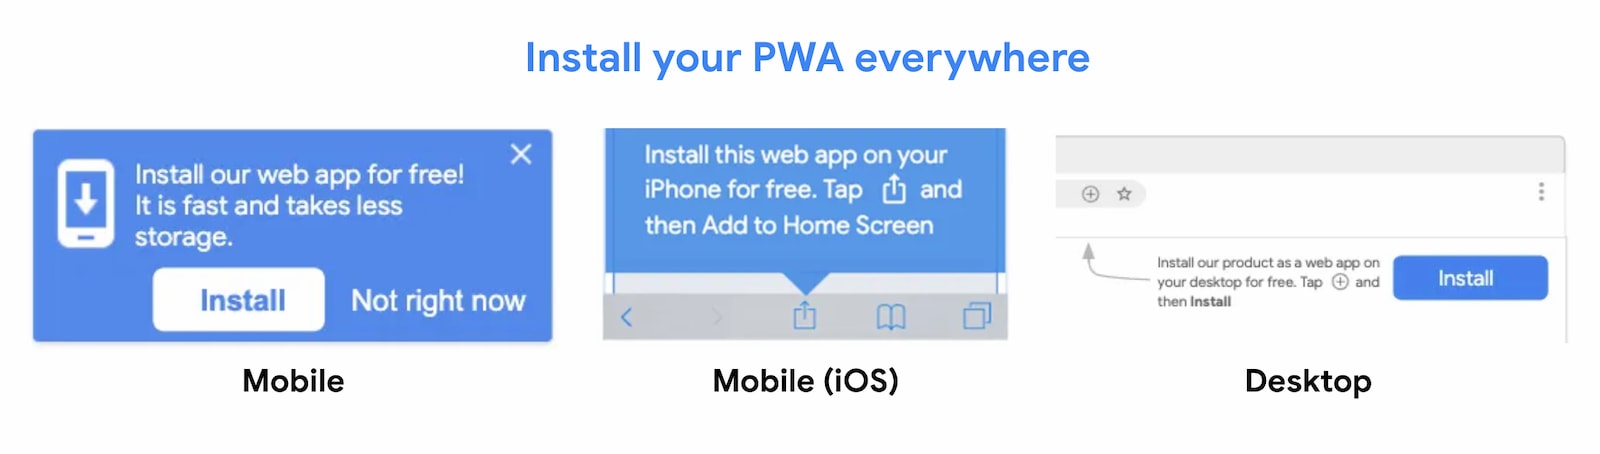 PWAs are installable everywhere.